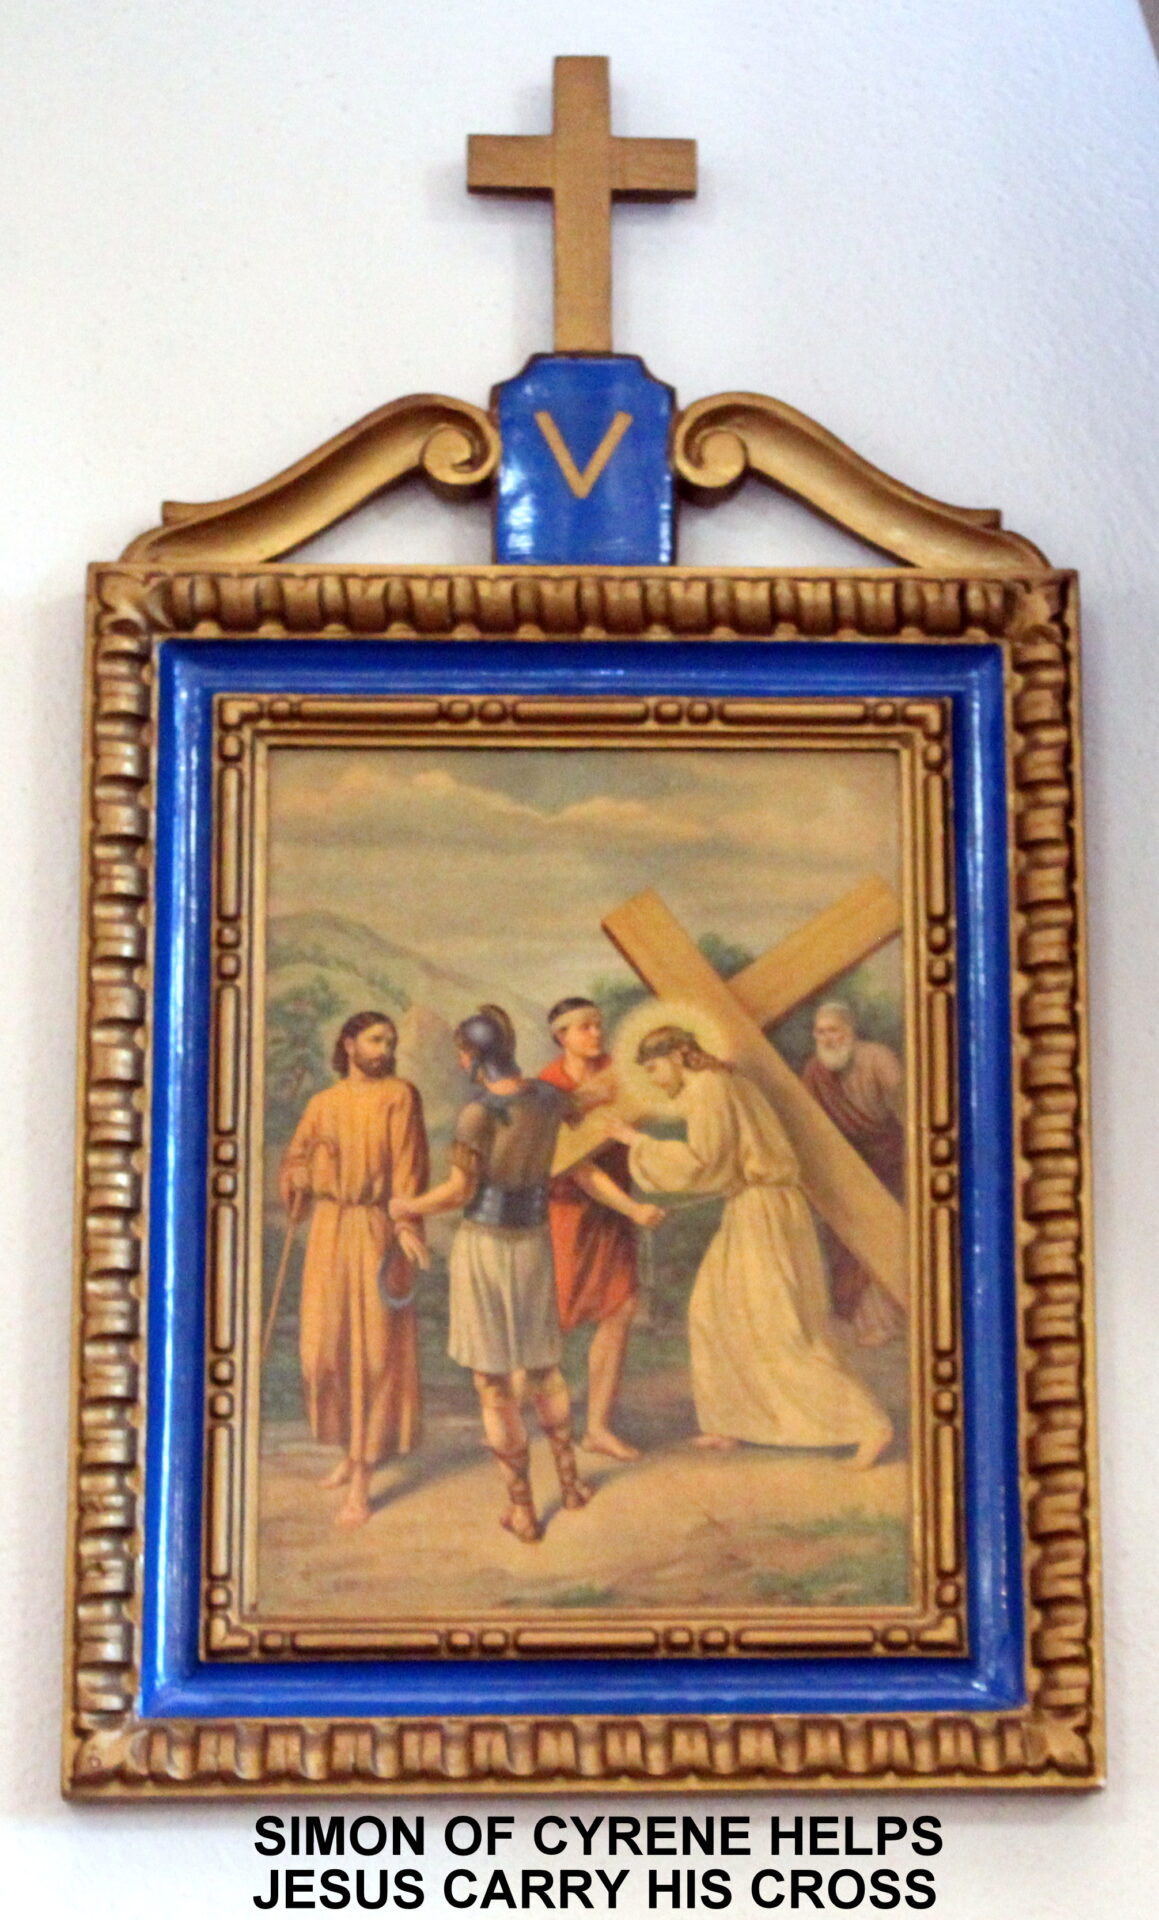 The fifth chapter of the station of the cross